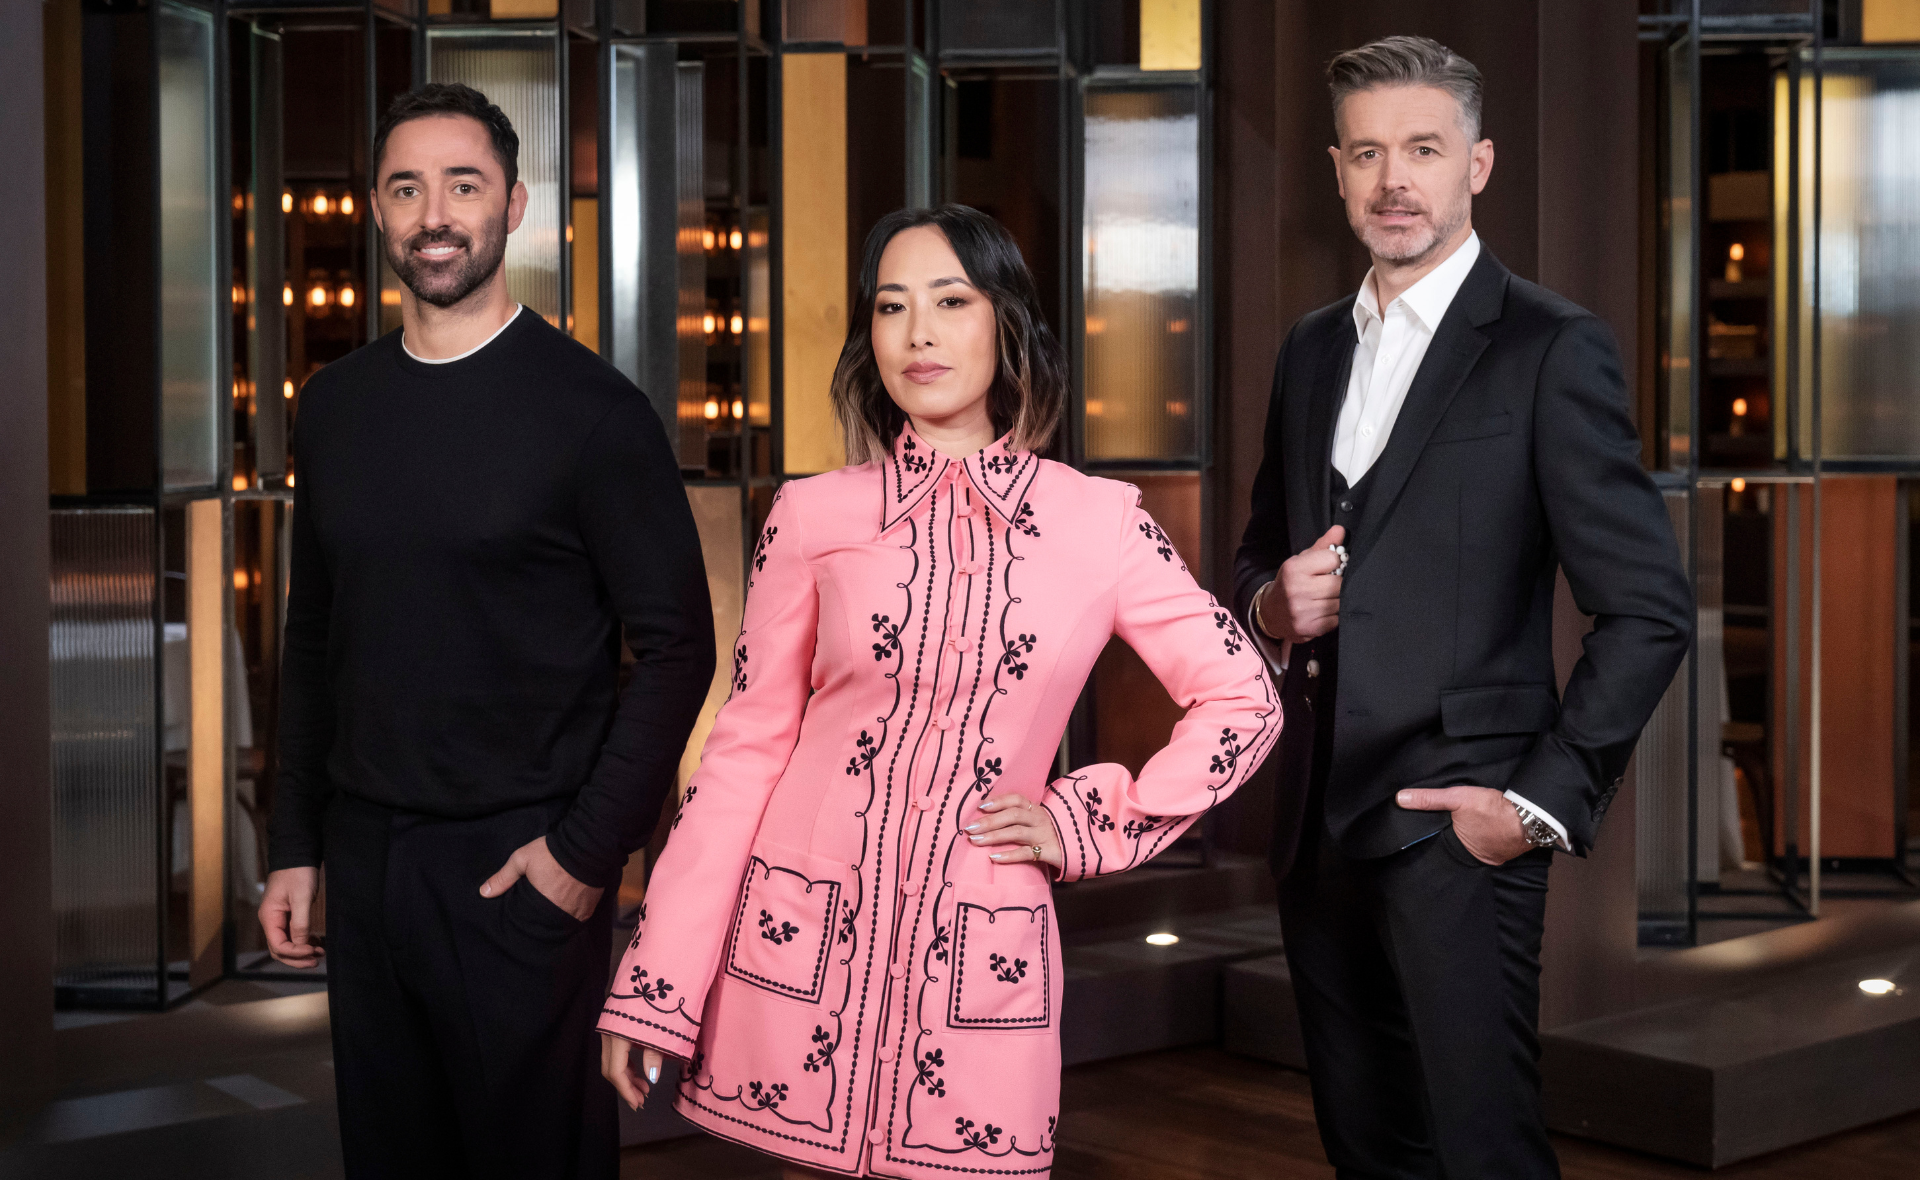 EXCLUSIVE: How Andy Allen, Melissa Leong and Jock Zonfrillo rose to the top after Masterchef